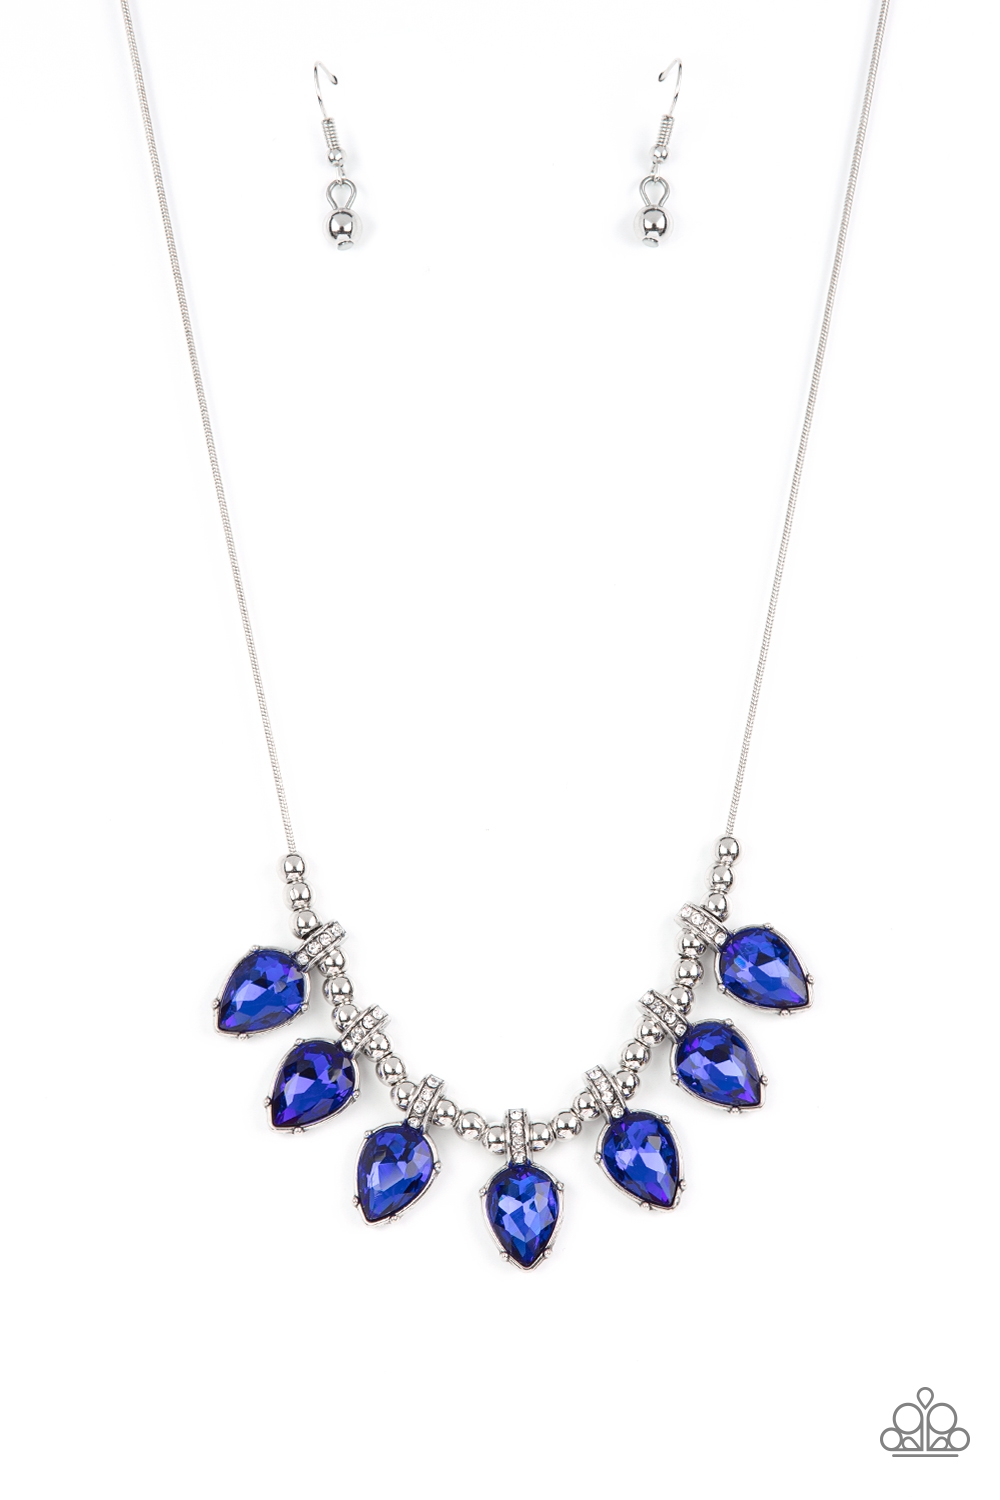 Necklace - Crown Jewel Couture - Blue